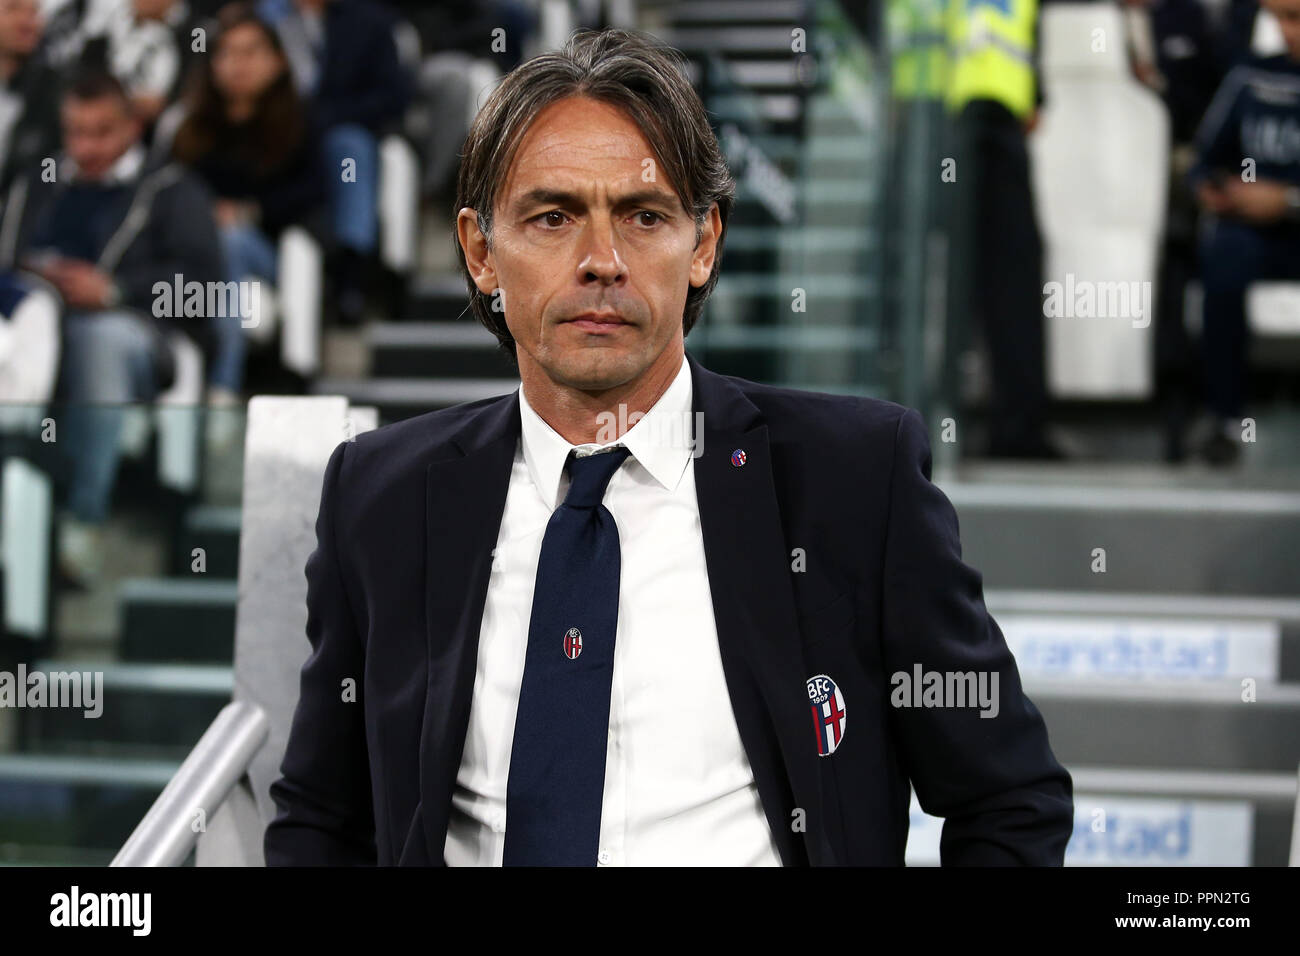 Torino, Italy. 26th September 2018. Filippo Inzaghi, head coach of Bologna Fc, looks on before the Serie A football match between Juventus Fc and Bologna Fc. Credit: Marco Canoniero/Alamy Live News Stock Photo